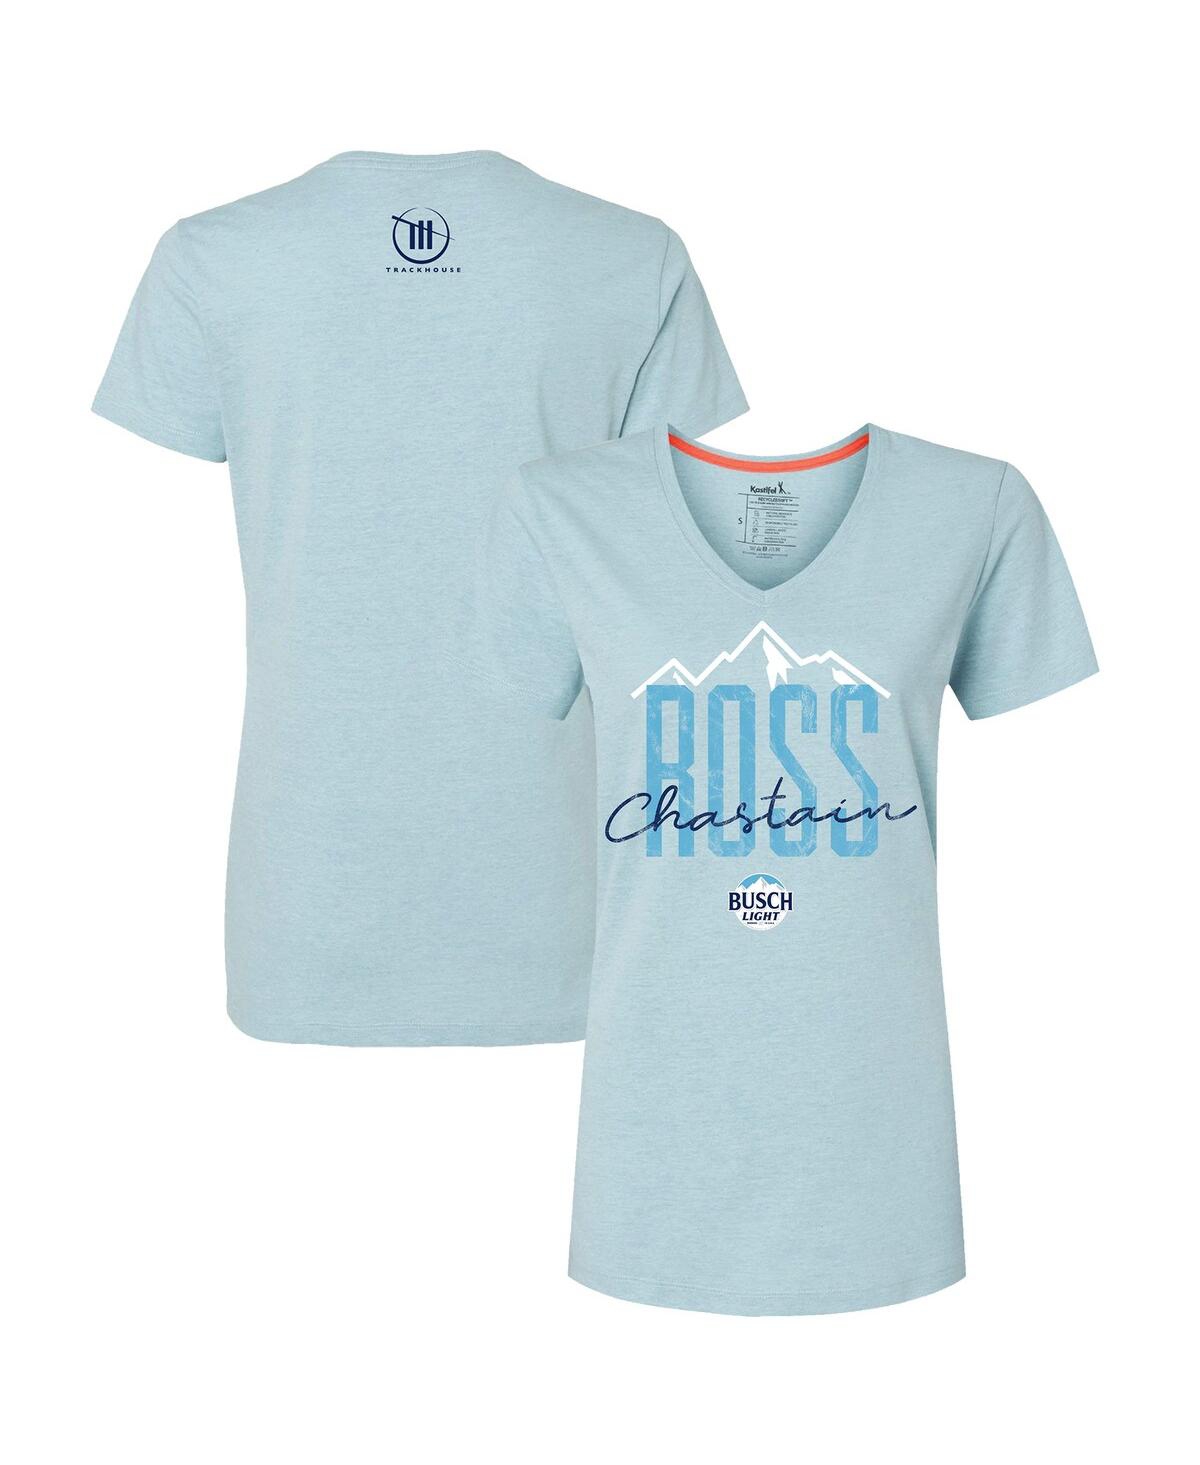 Shop Trackhouse Racing Team Collection Women's  Blue Ross Chastain Mountains V-neck T-shirt